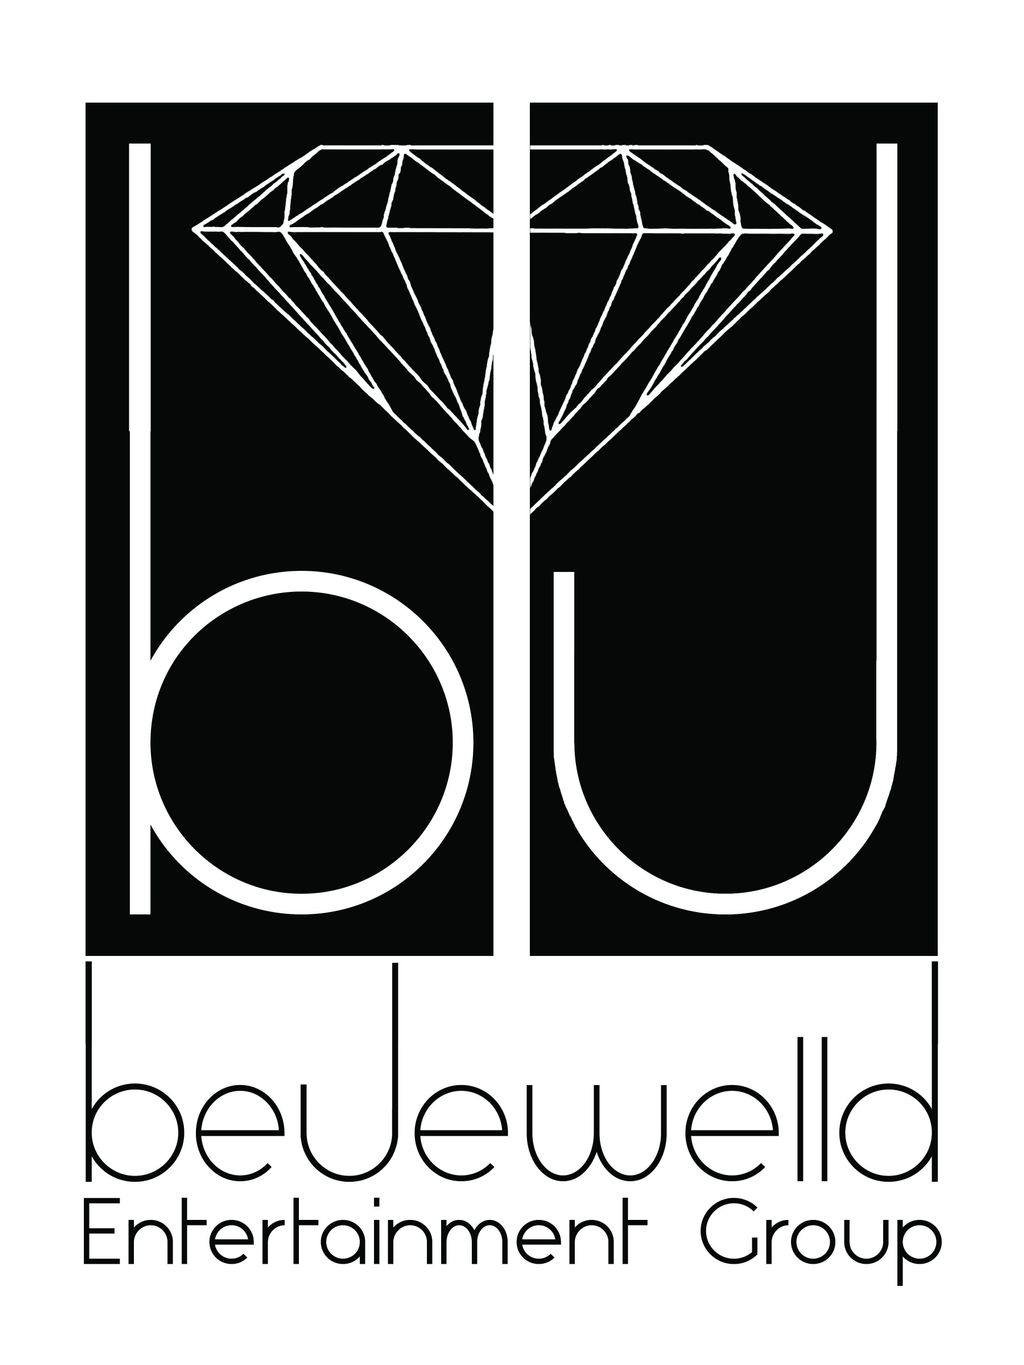 BeJewell'd Entertainment Group